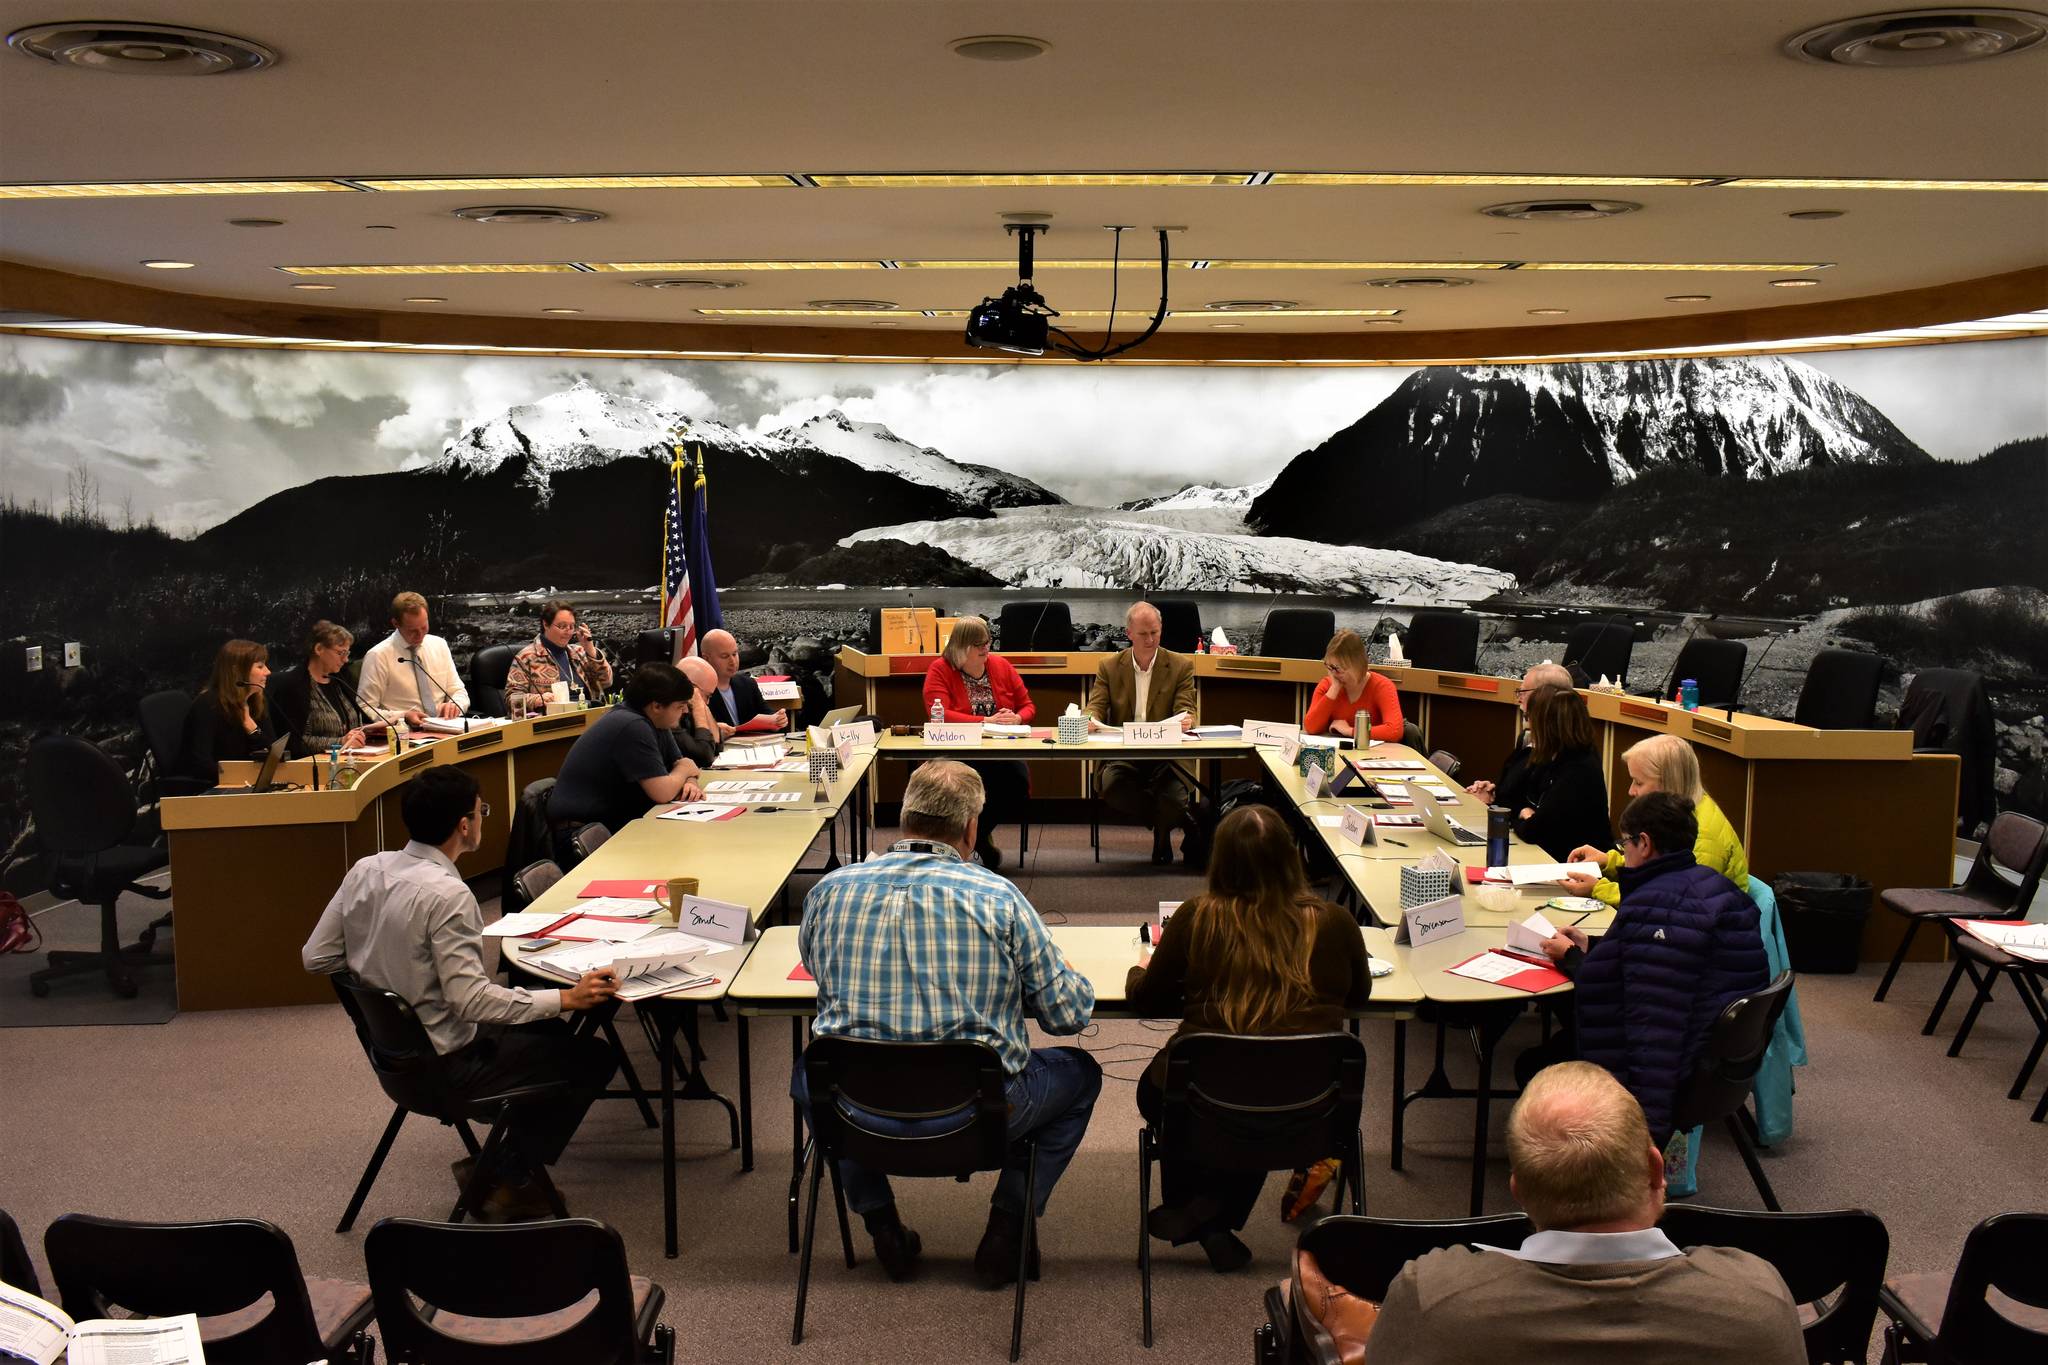 Members of the City Assembly and Board of Education meet at Juneau City Hall on Monday, Oct. 28, 2019. (Peter Segall | Juneau Empire)